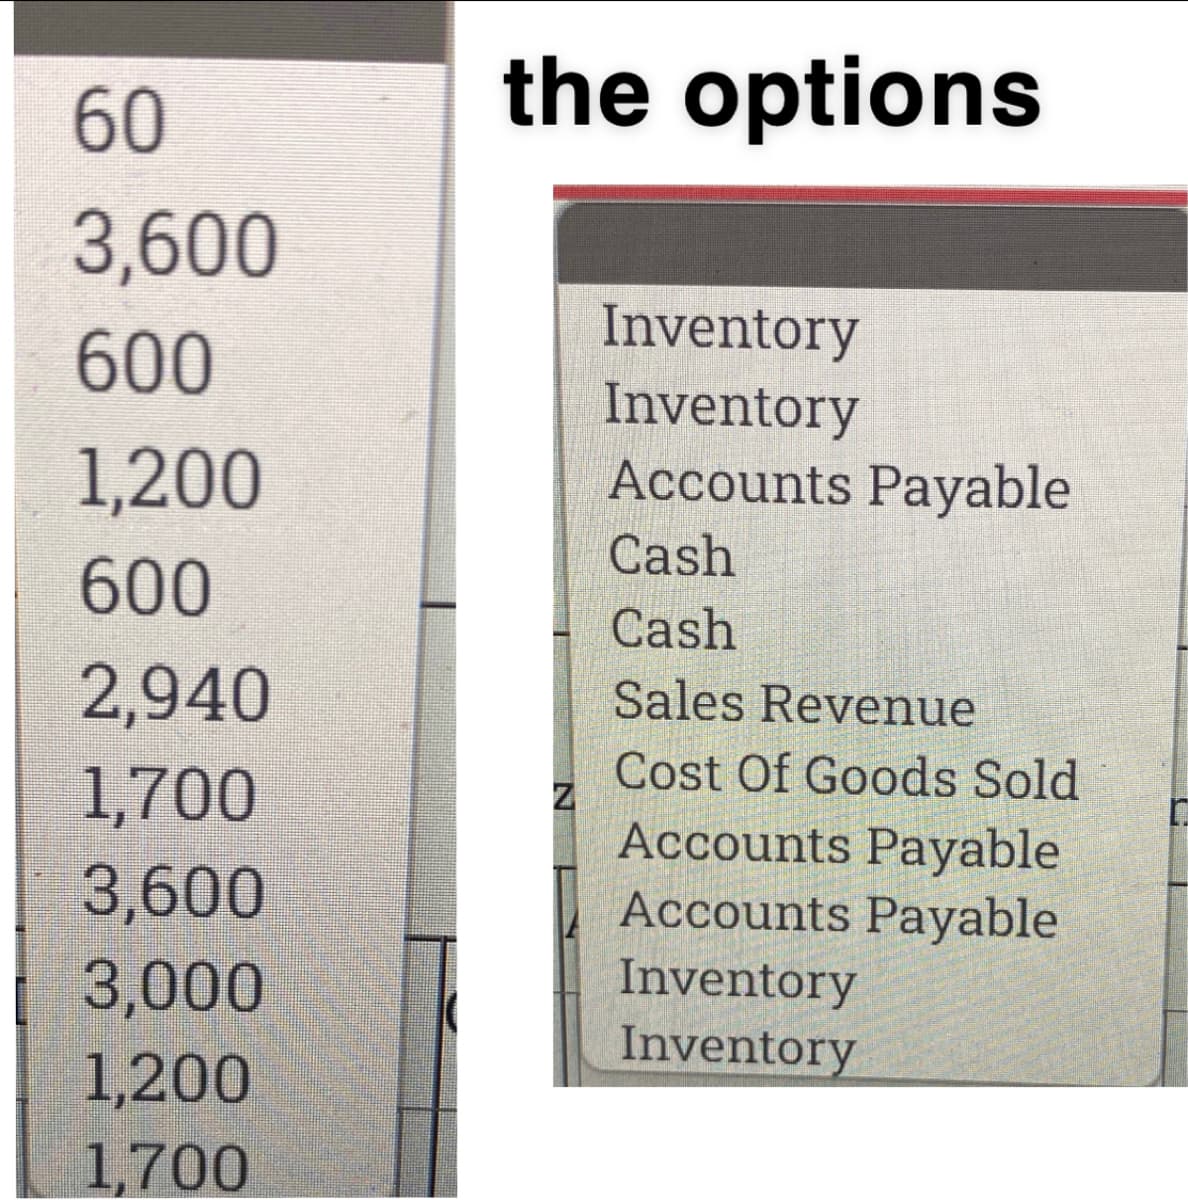 60
the options
3,600
Inventory
Inventory
Accounts Payable
600
1,200
Cash
600
Cash
2,940
Sales Revenue
Cost Of Goods Sold
Accounts Payable
Accounts Payable
1,700
3,600
3,000
Inventory
Inventory
1,200
1,700
